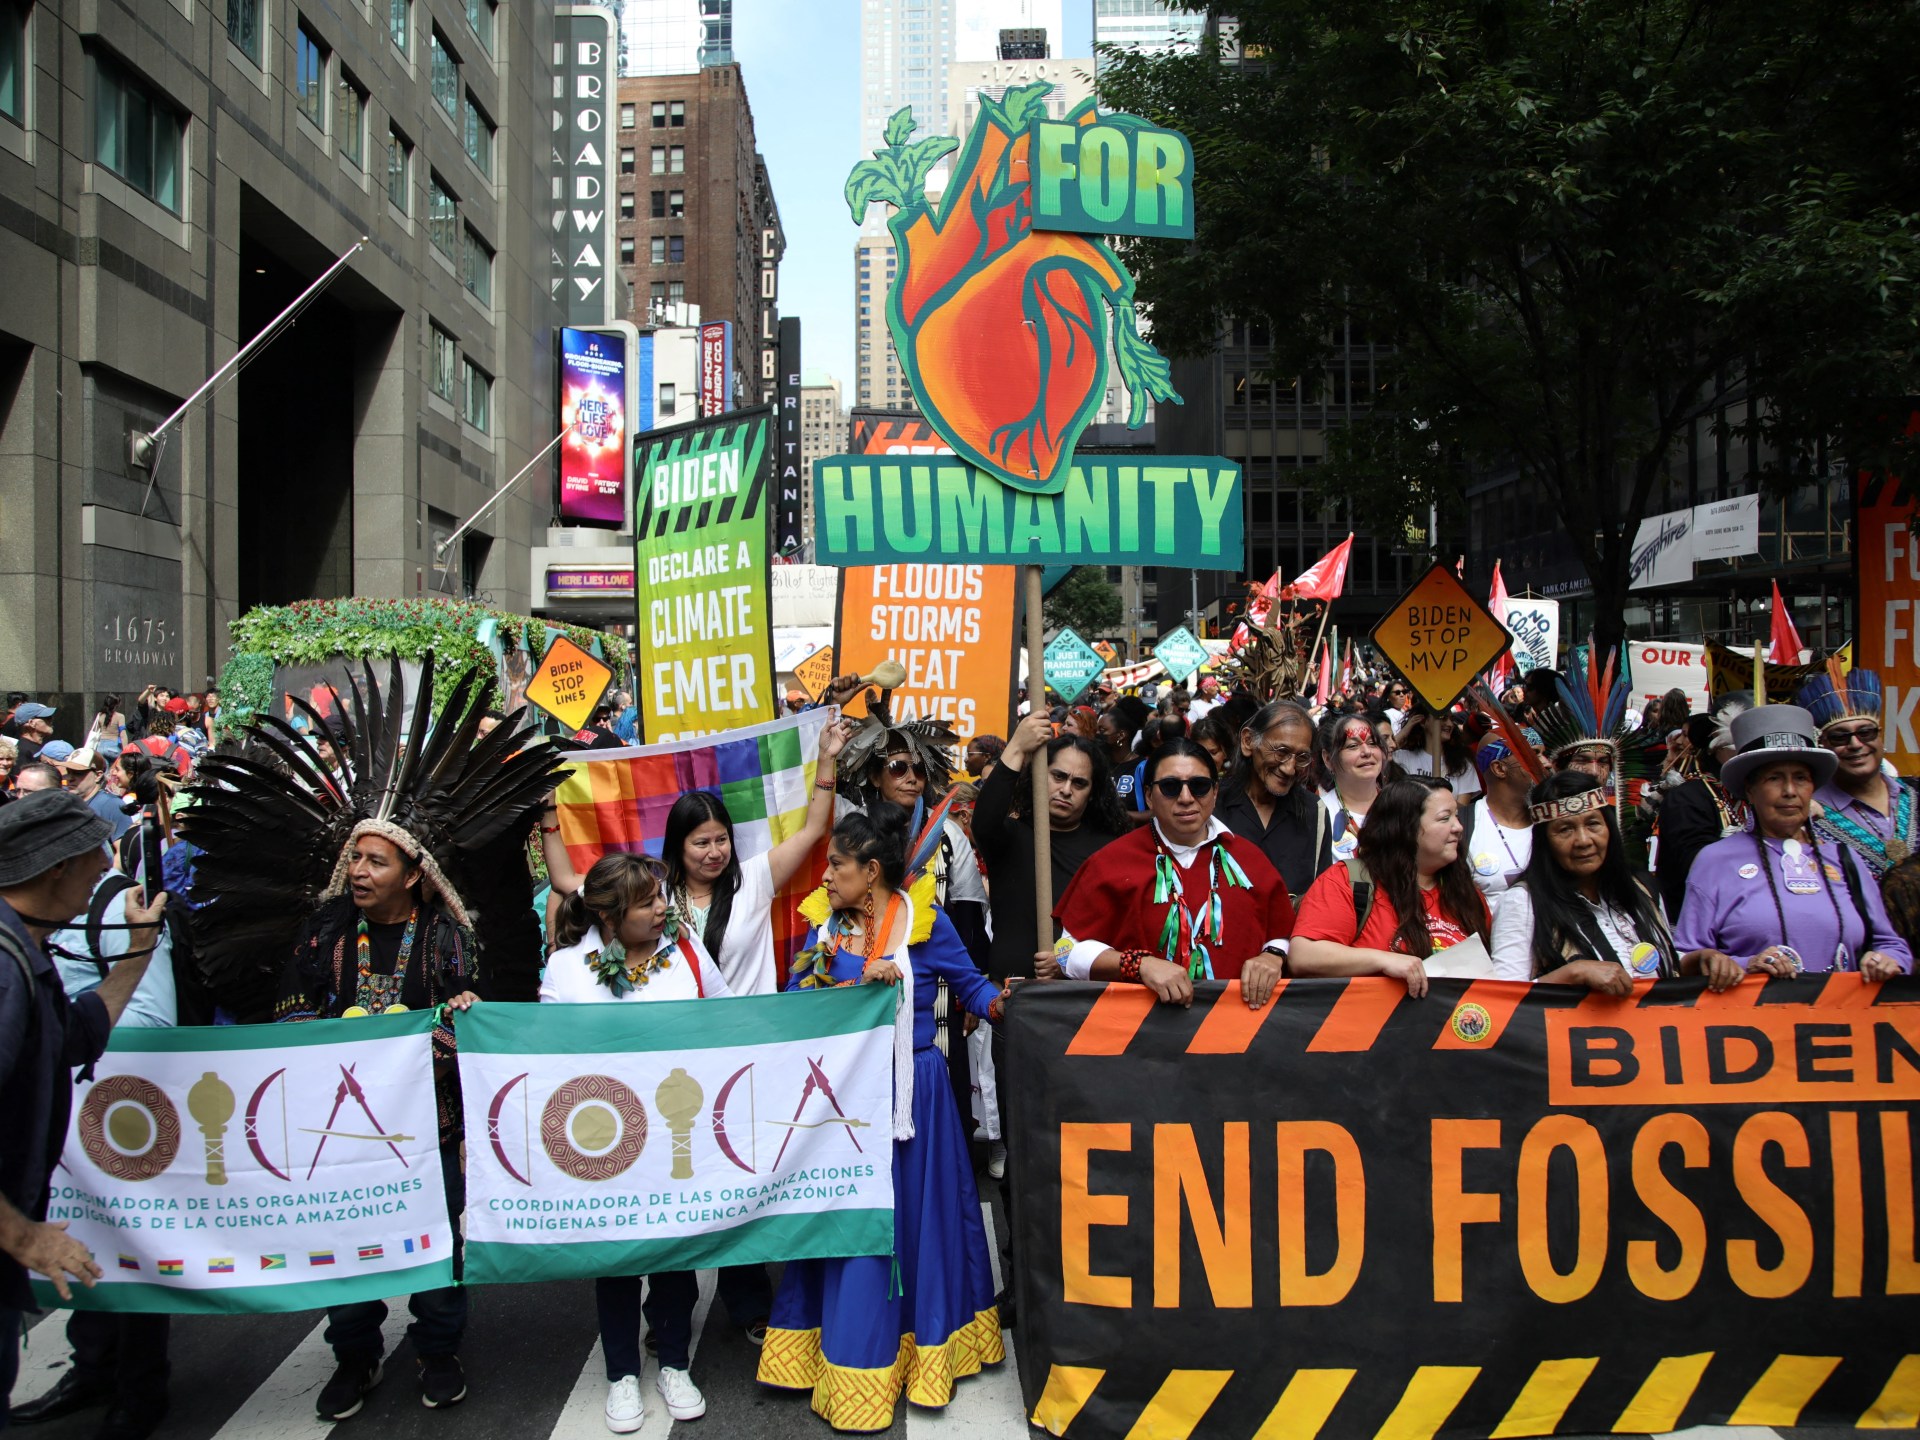 Tens of thousands rally in New York demanding end to fossil fuels